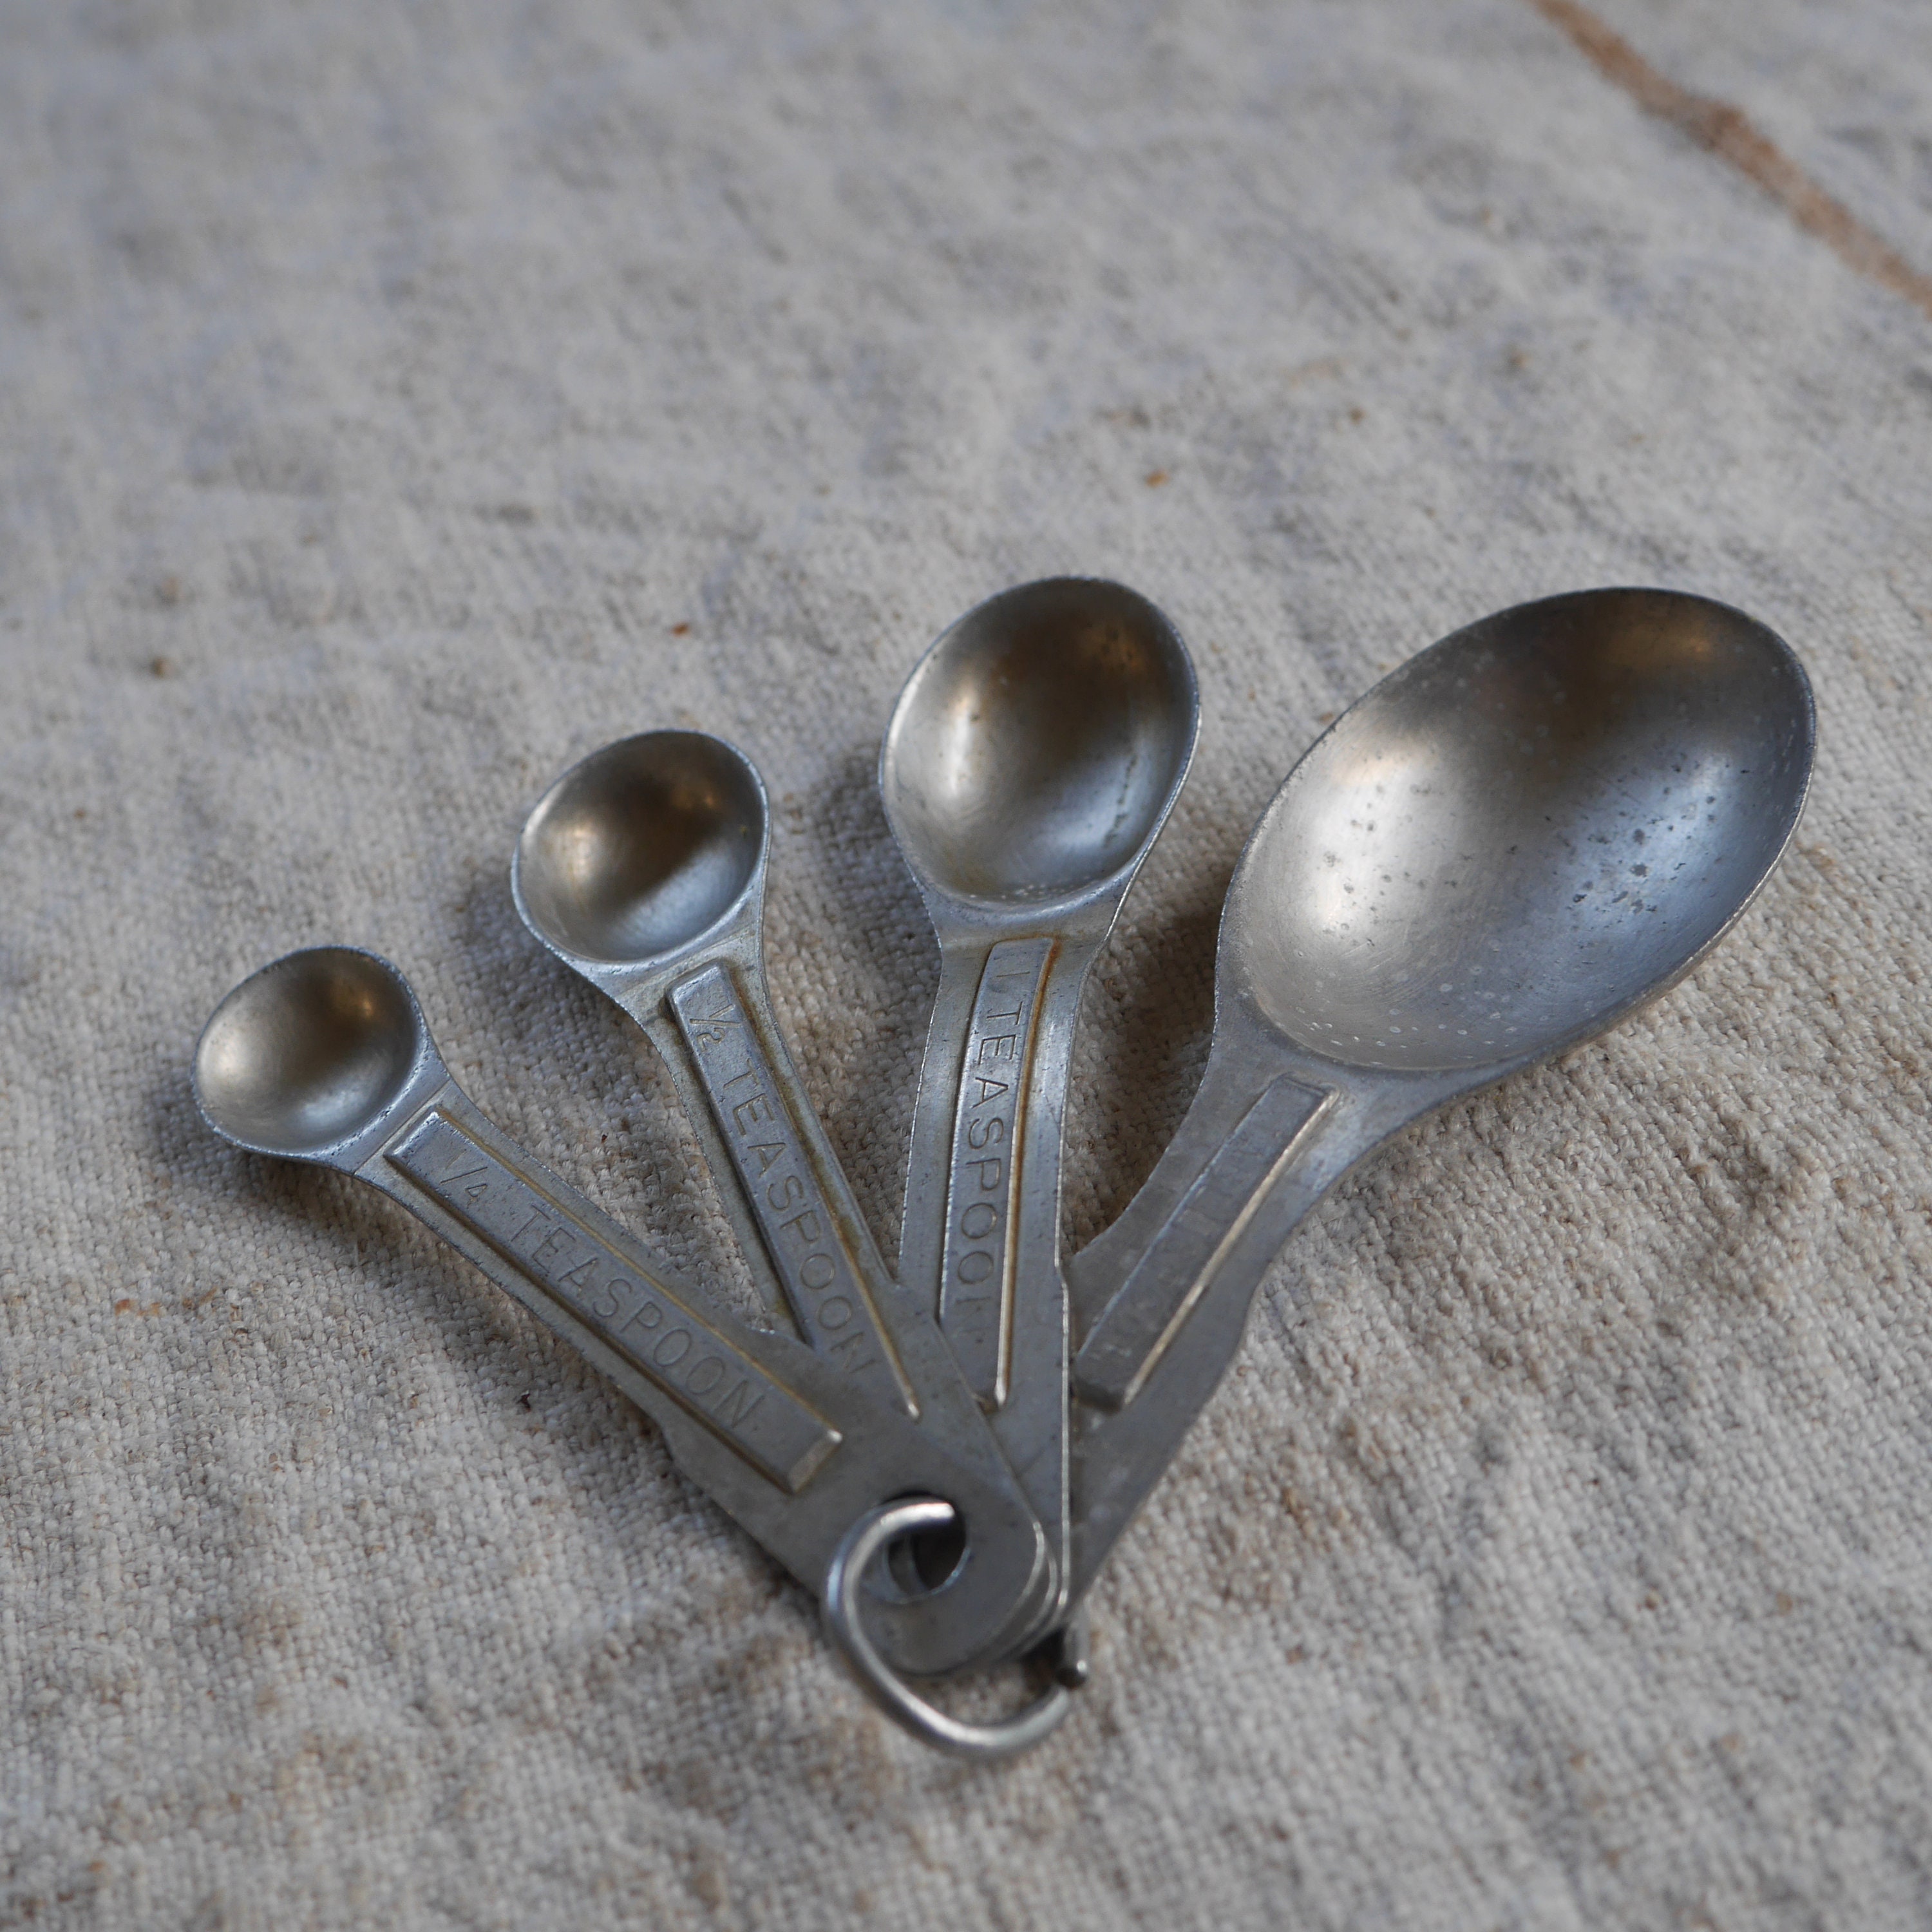 Measuring Spoons - Liberty Tabletop - Pewter measuring spoons - USA